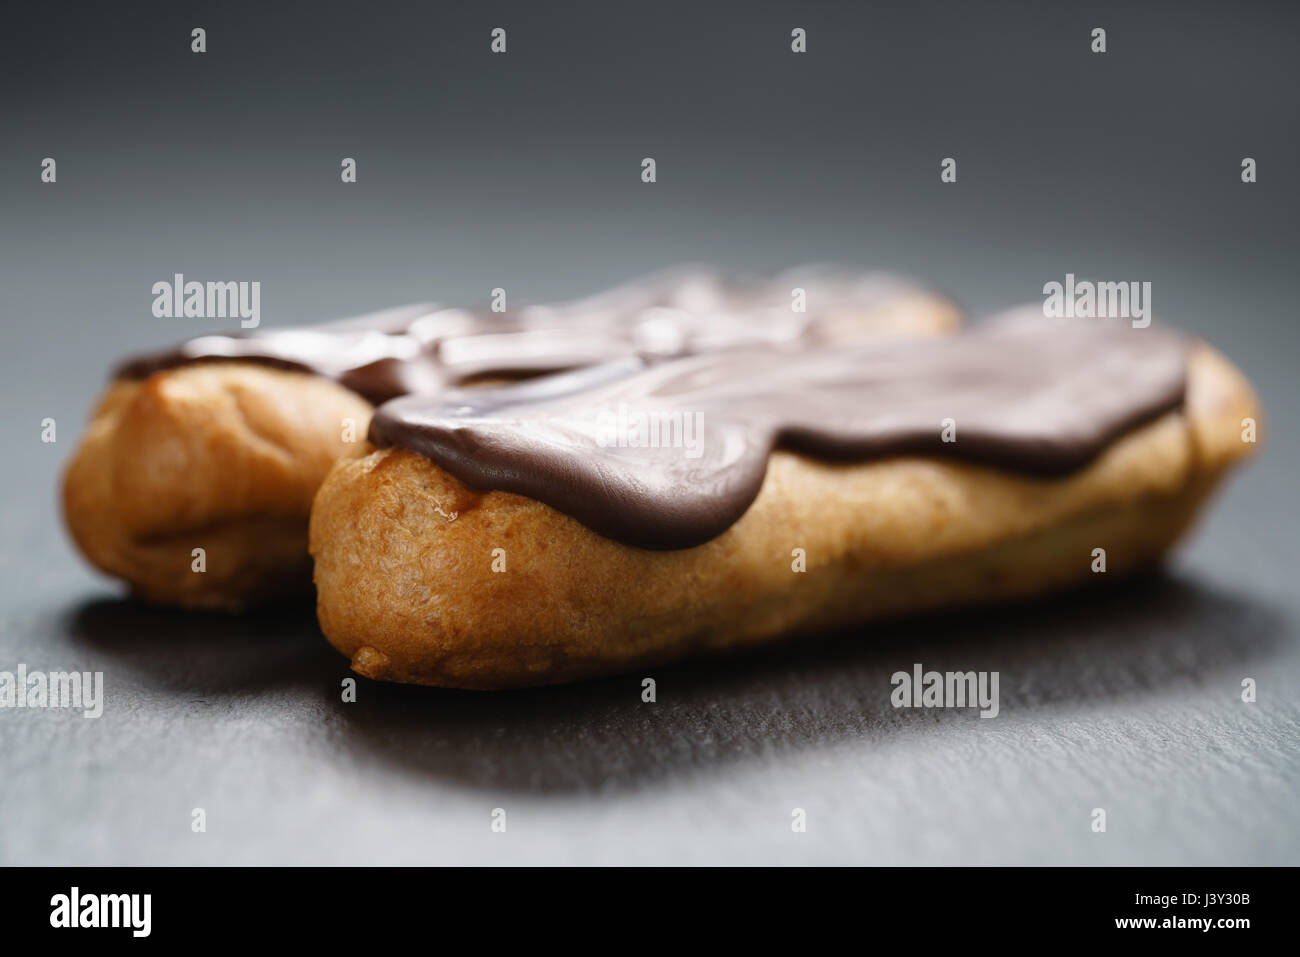 two eclairs with dark chocolate on top on slate background Stock Photo